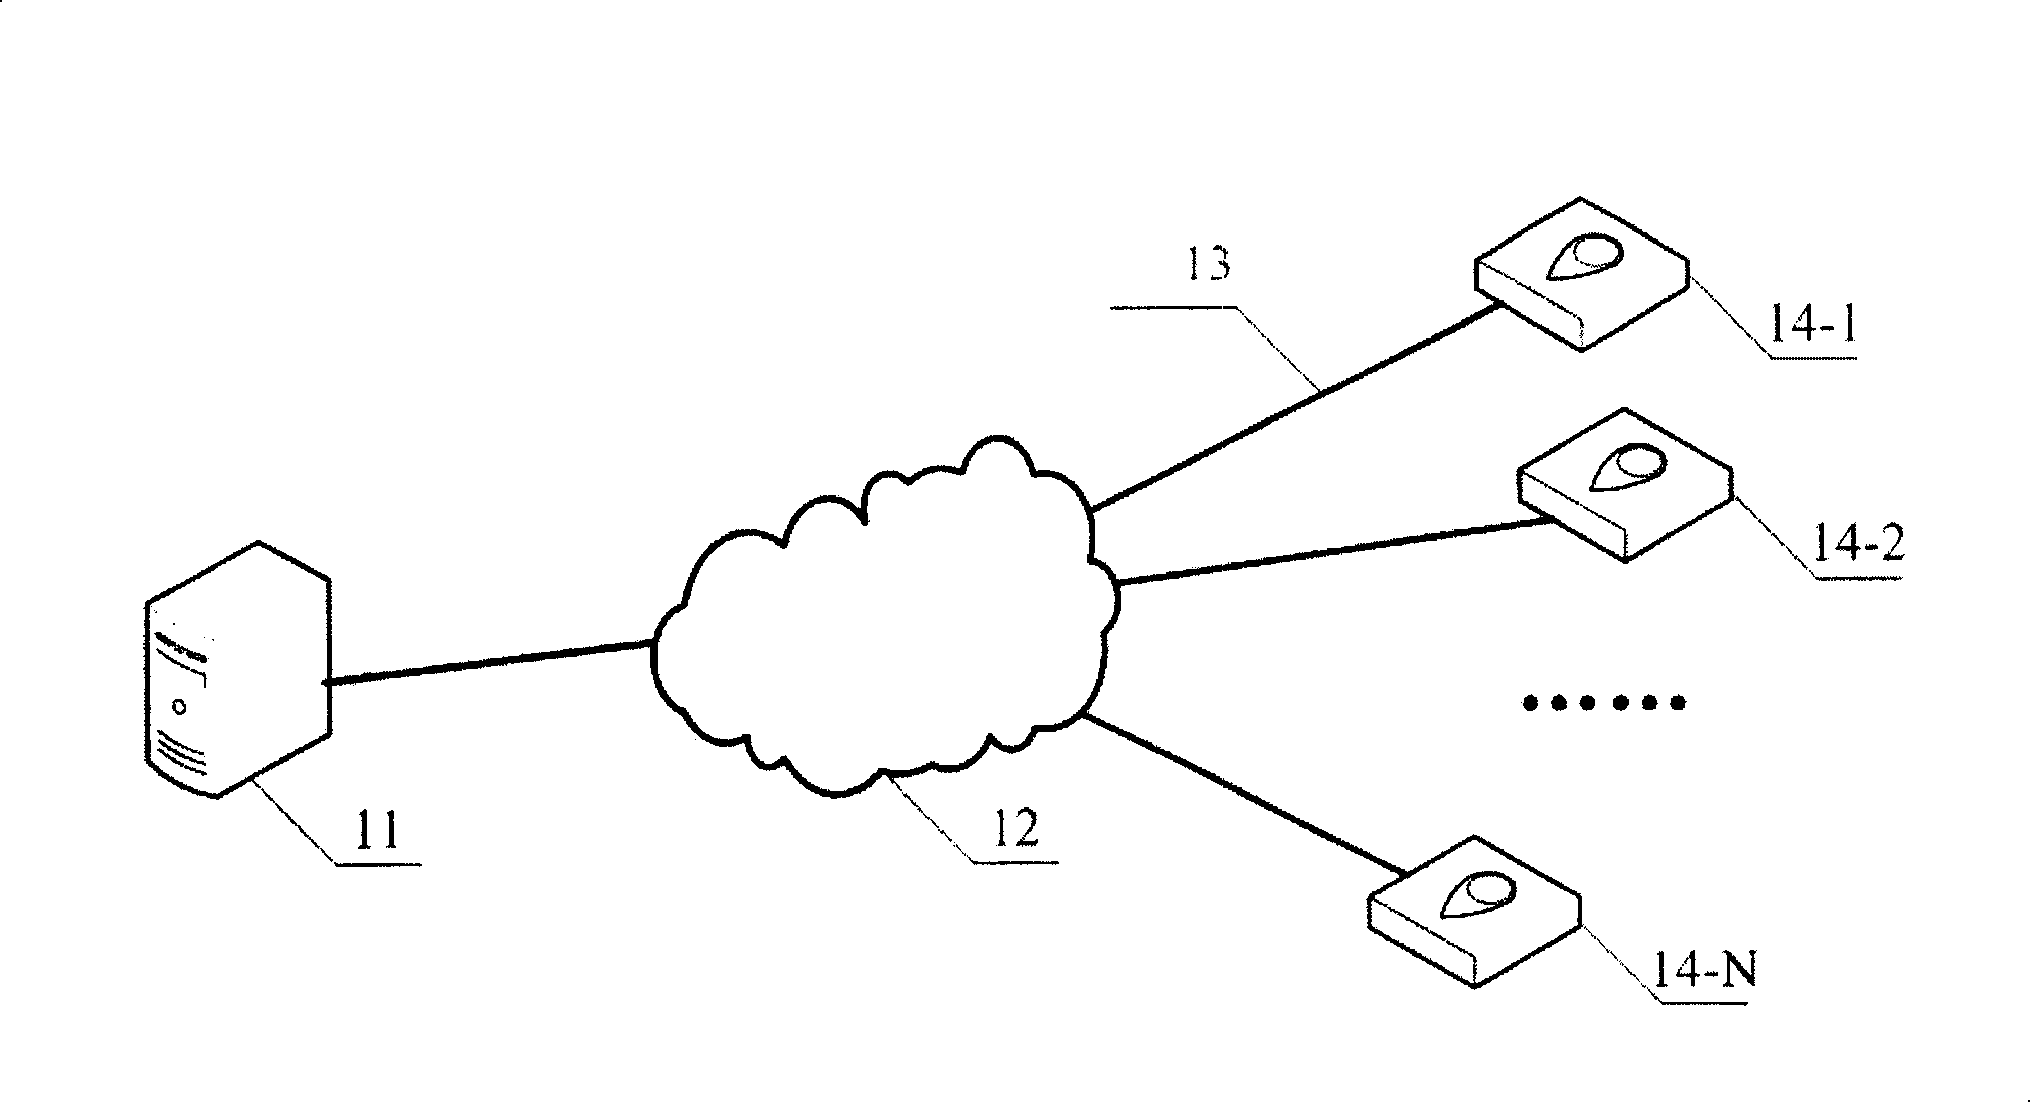 Method and system of remote network identification authenticating based on multiple biology characteristics